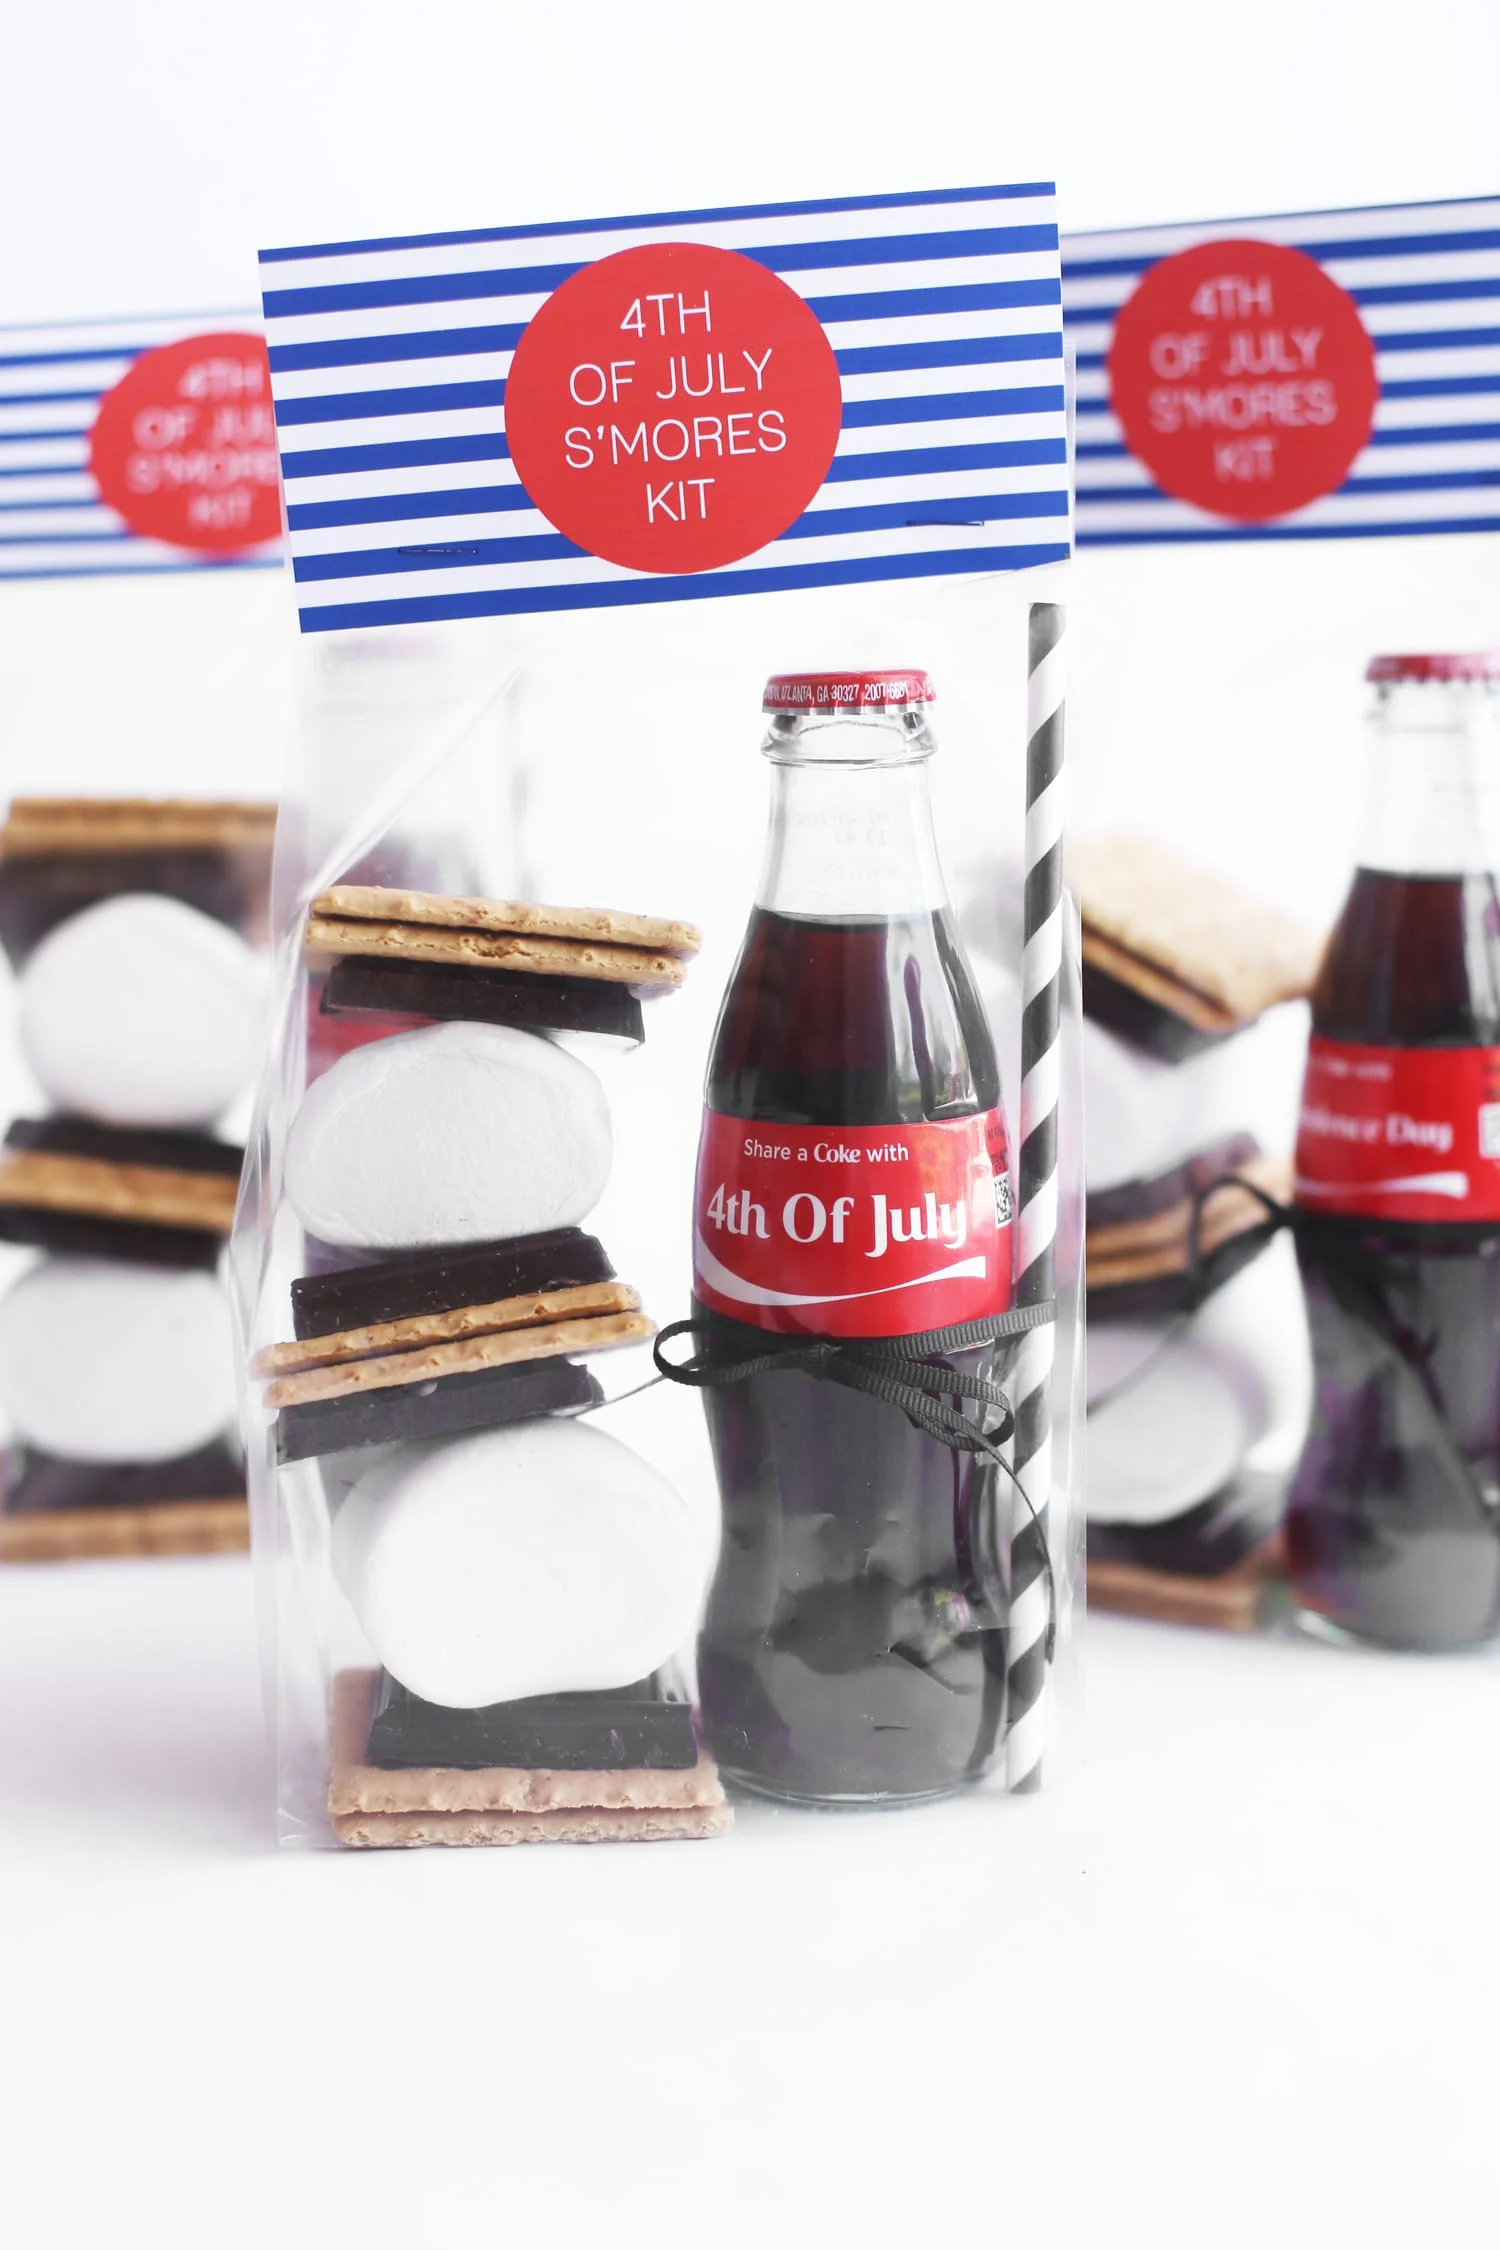 Red, White and Blue S'mores Kits | 4th of July decorations, 4th of July party ideas and more from @cydconverse